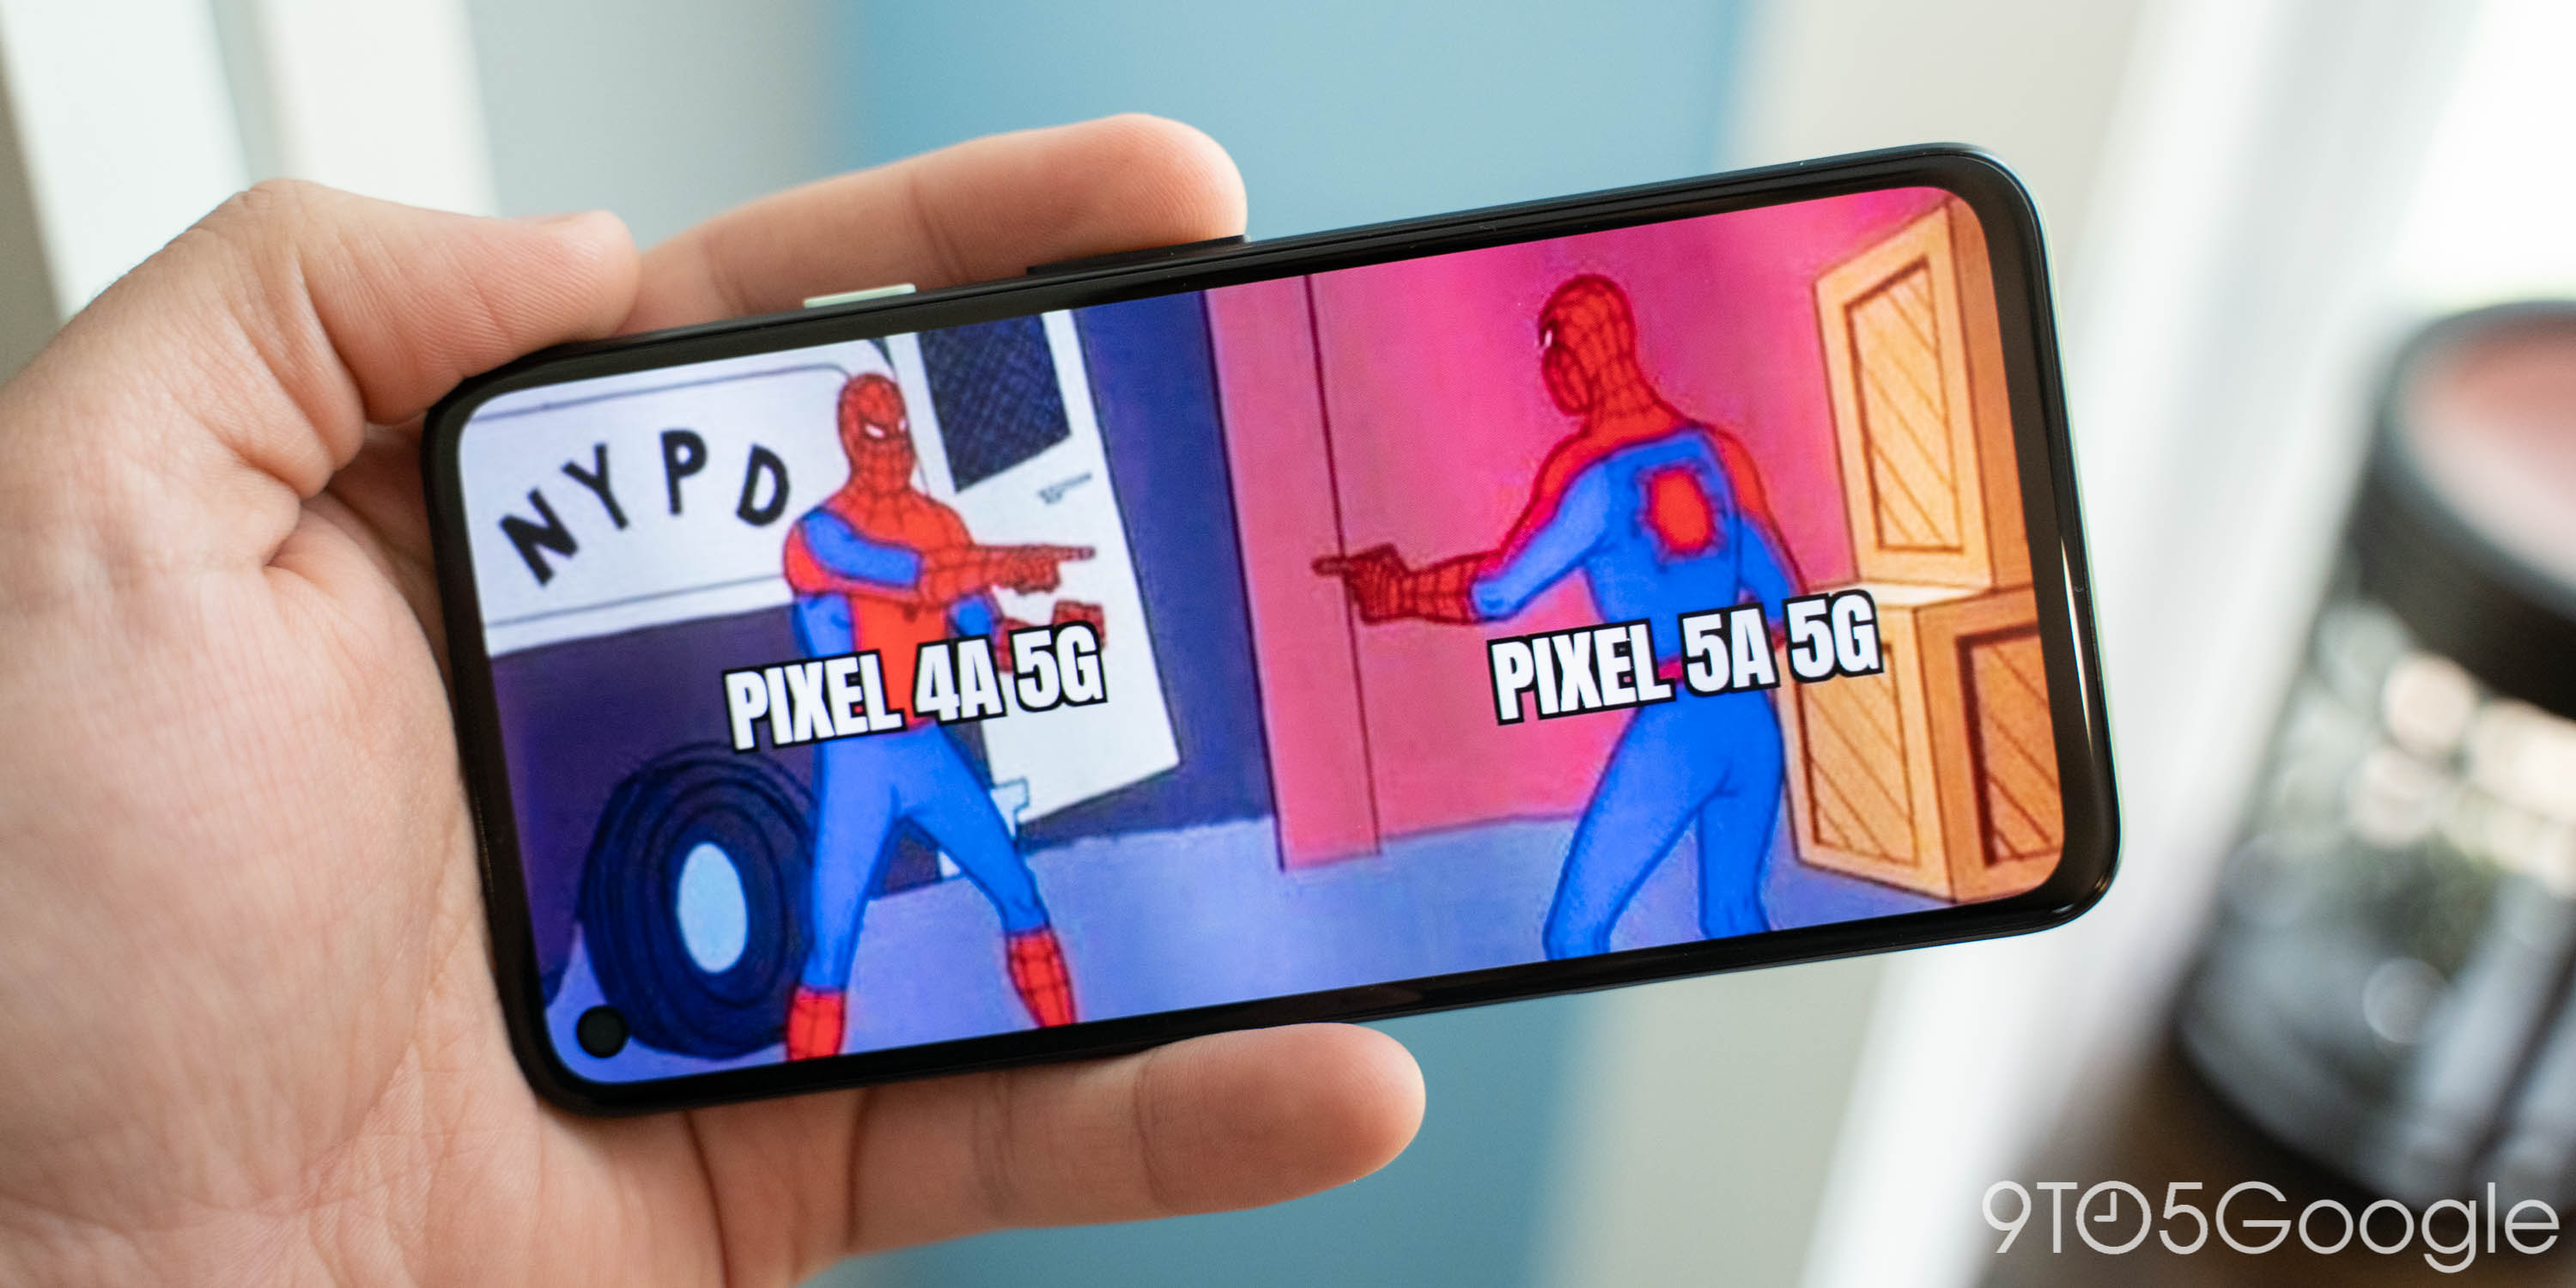 Pixel 5a 5g What Will Be New Compared To Pixel 4a 5g 9to5google